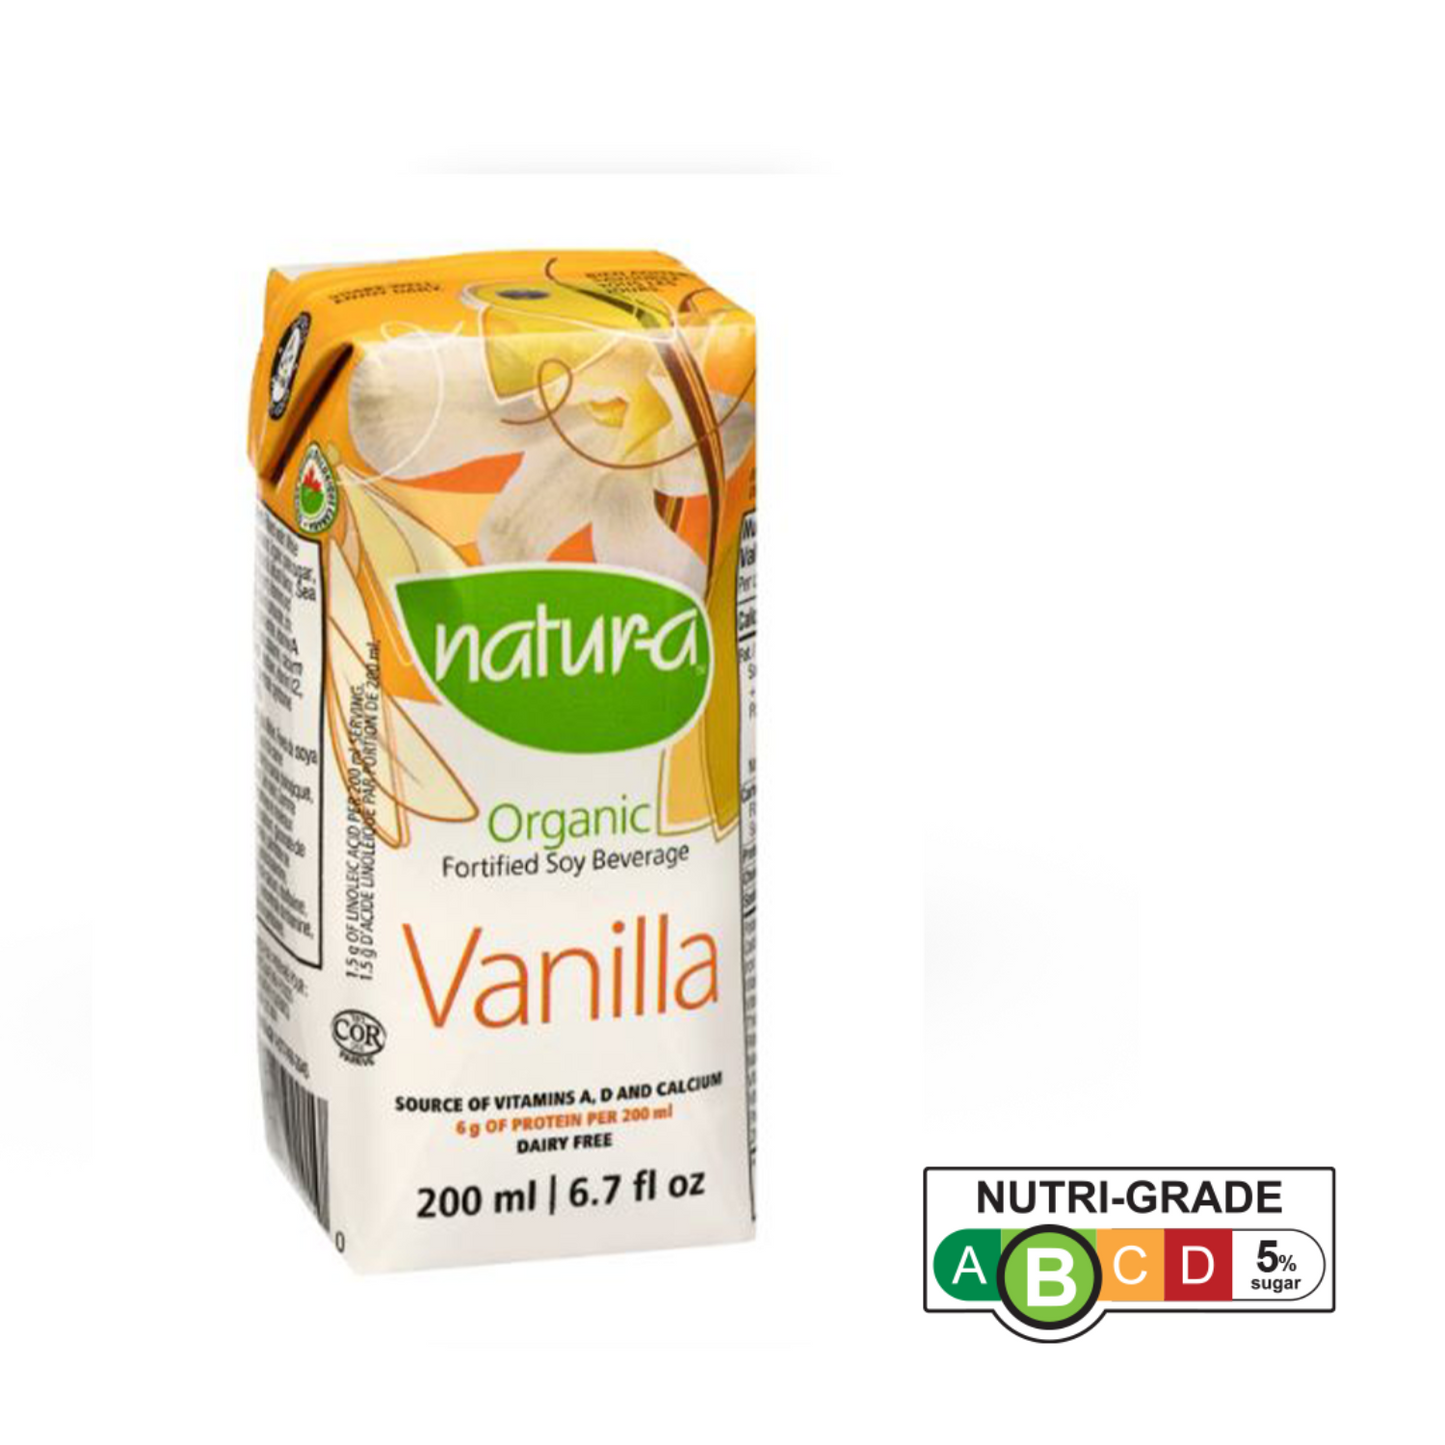 Natur-a Enriched Soy Beverage - Vanilla (Organic), 200 ml. - Single Pack